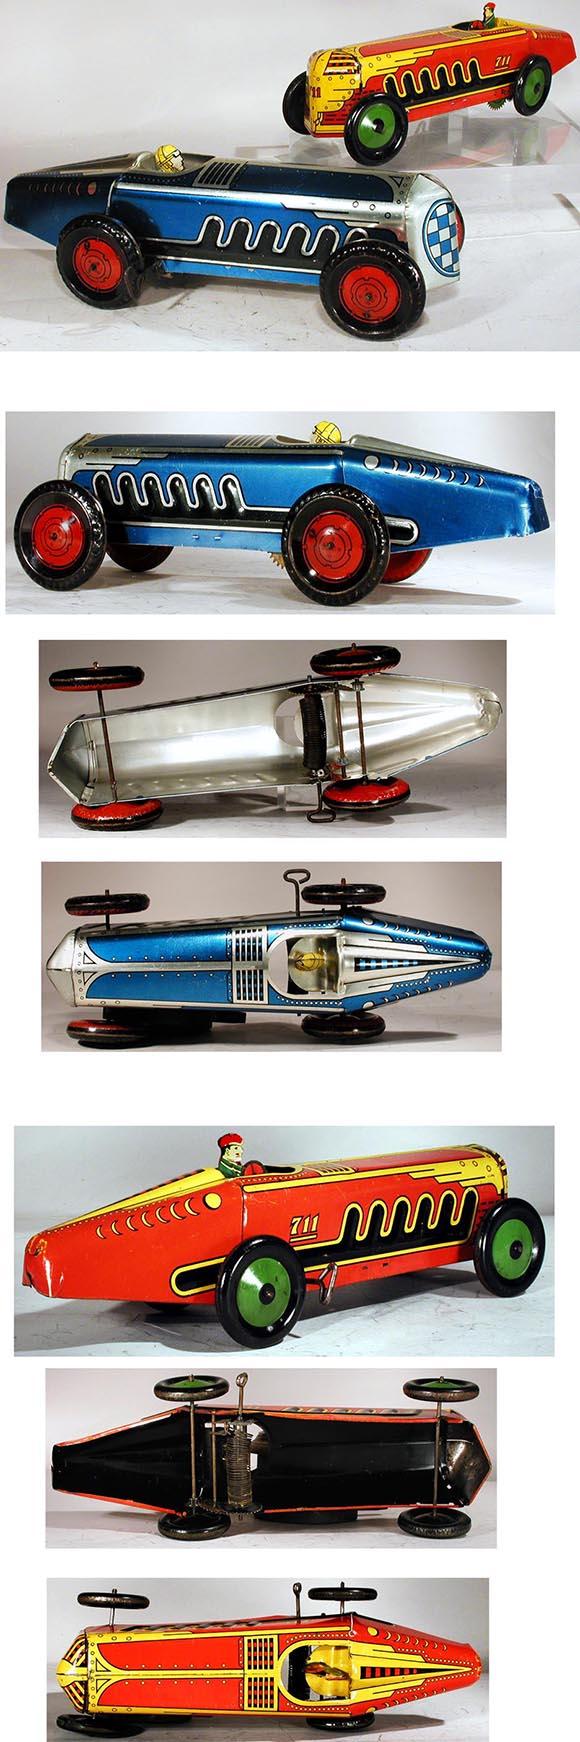 c.1935 Marx, Speed Racer (Blue) and Giant King Racer (Red)